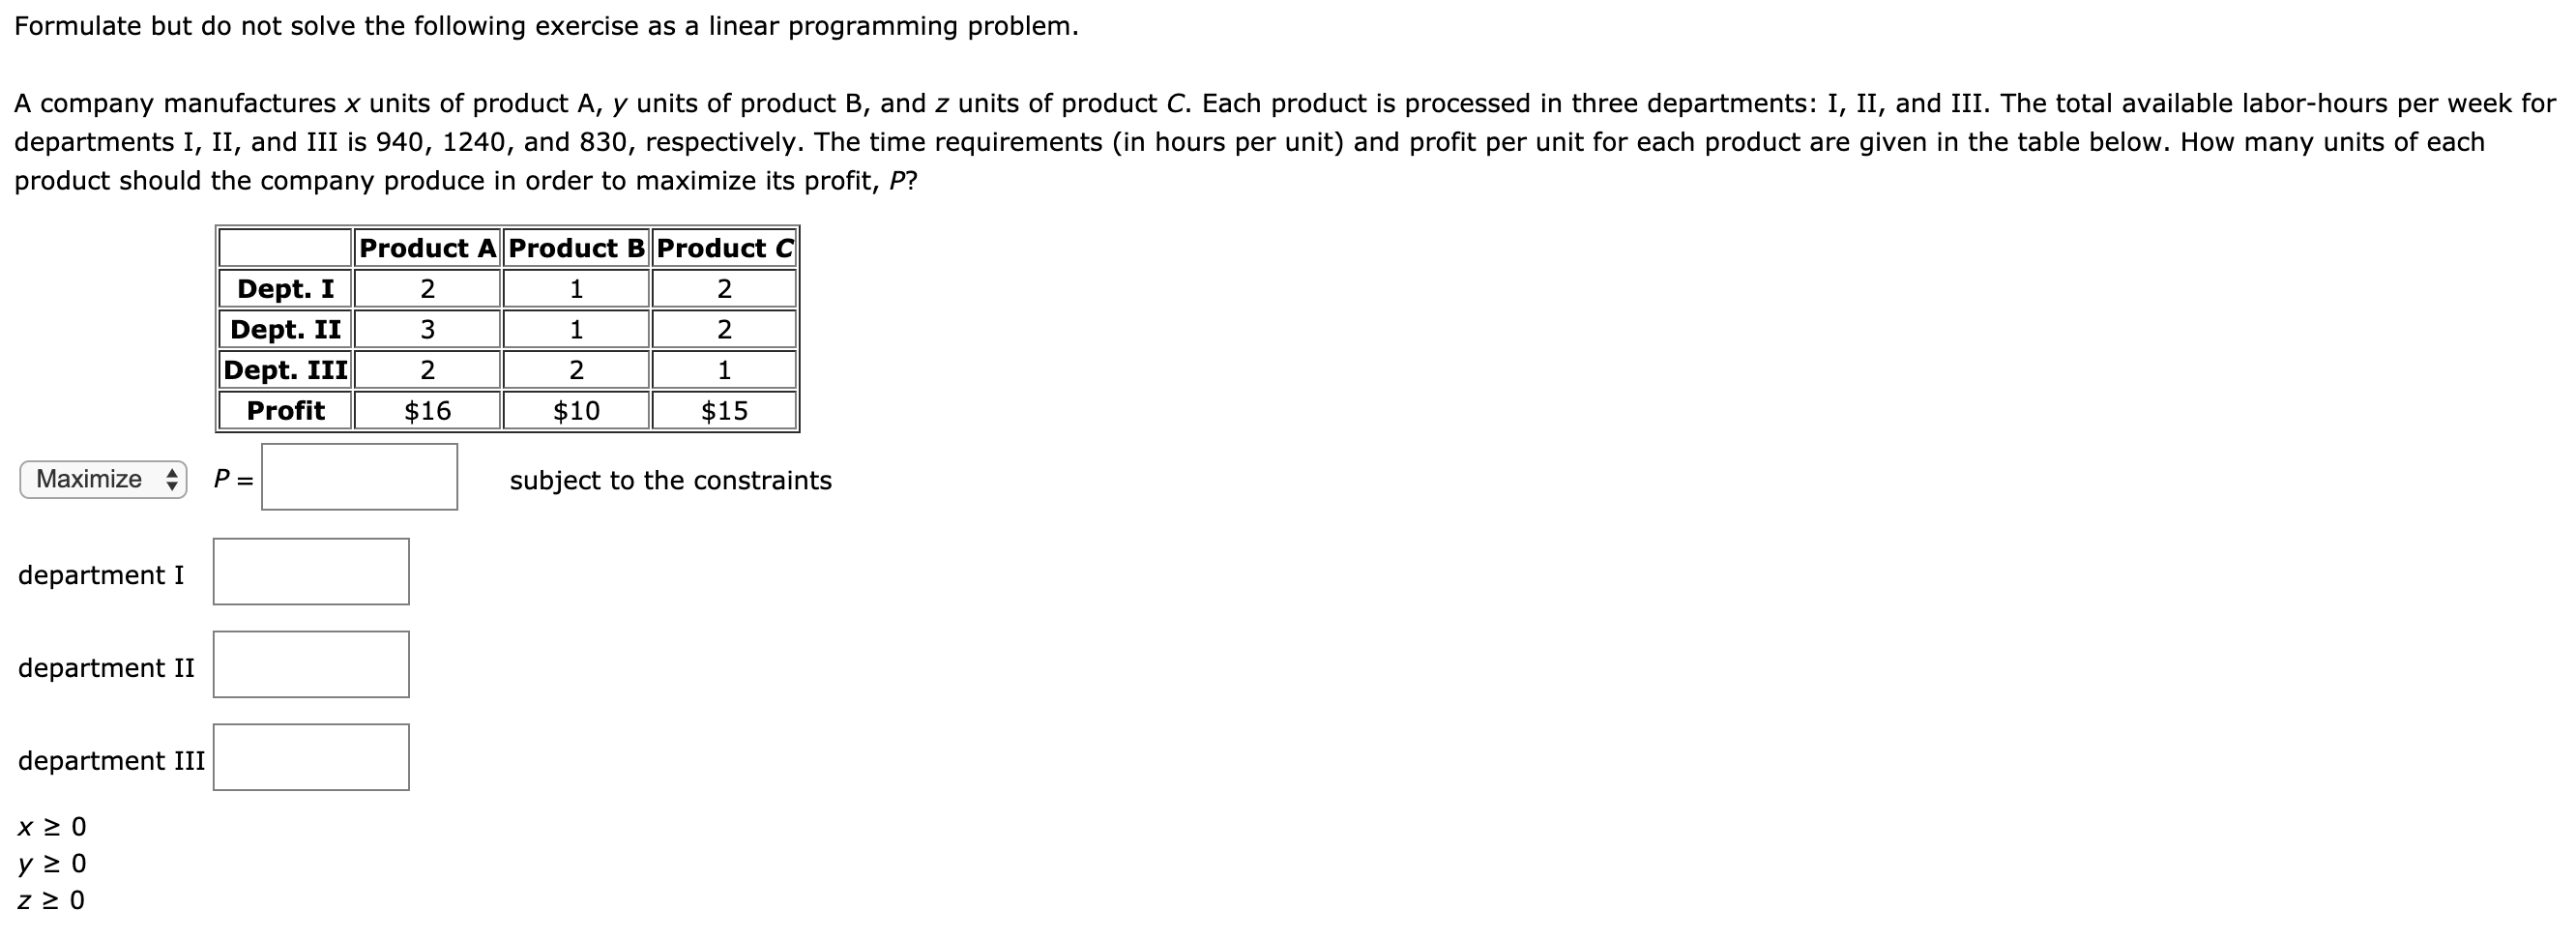 Formulate but do not solve the following exercise as a linear programming problem.
A company manufactures x units of product A, y units of product B, and z units of product C. Each product is processed in three departments: I, II, and III. The total available labor-hours per week for
departments I, II, and III is 940, 1240, and 830, respectively. The time requirements (in hours per unit) and profit per unit for each product are given in the table below. How many units of each
product should the company produce in order to maximize its profit, P?
Product AProduct B Product C
Dept. I
Dept. II
Dept. III
2
2
Profit
$16
$10
$15
Maximize
subject to the constraints
department I
department II
department III
